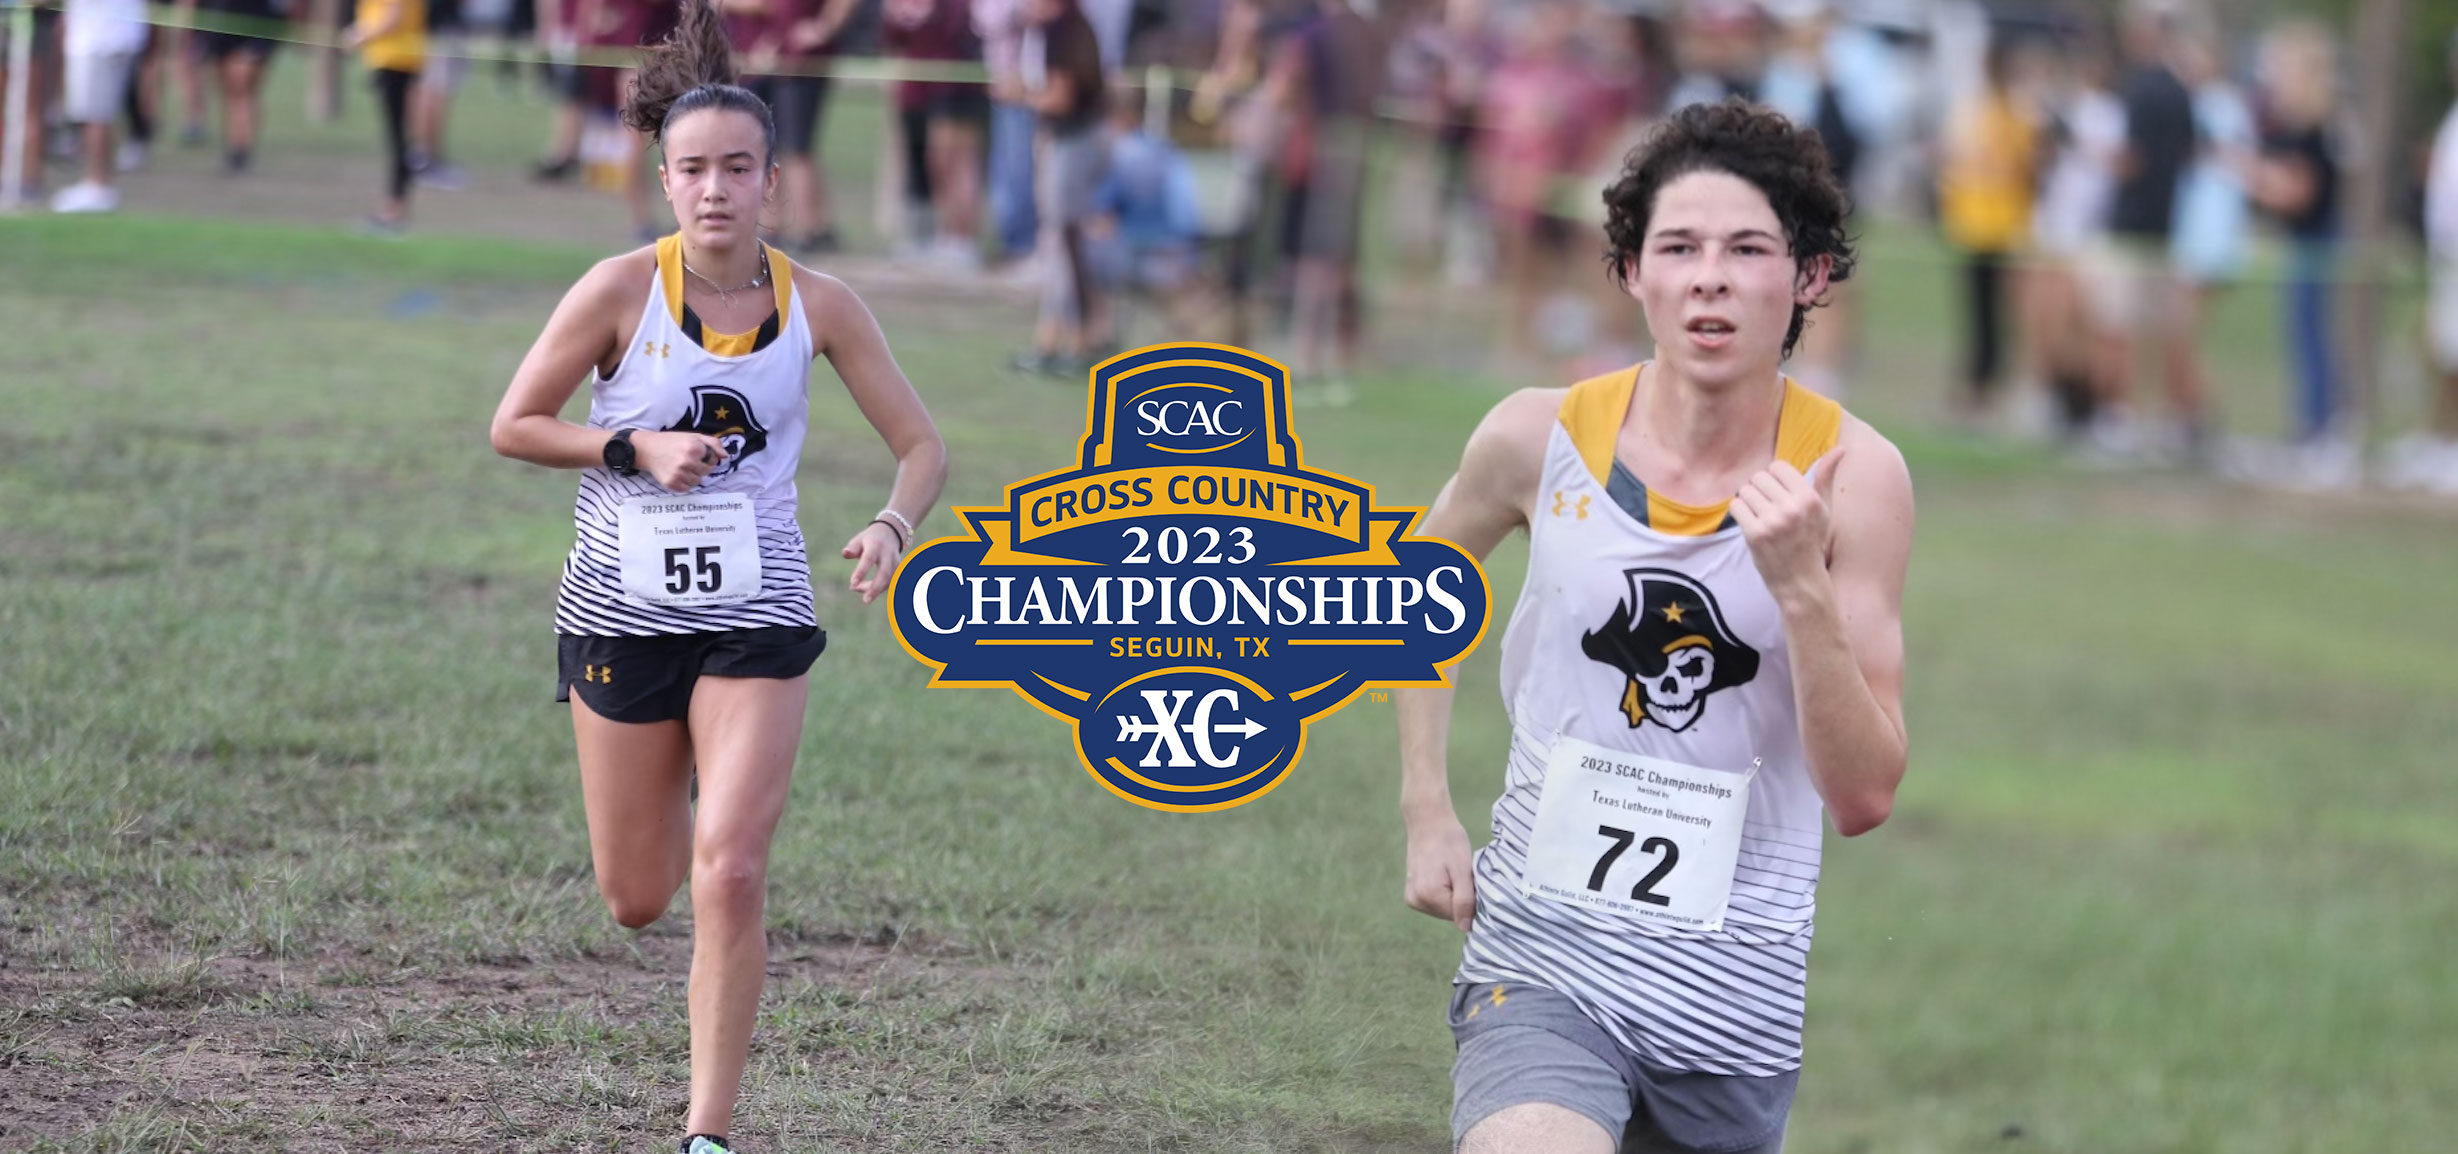 SCAC Cross Country Championships